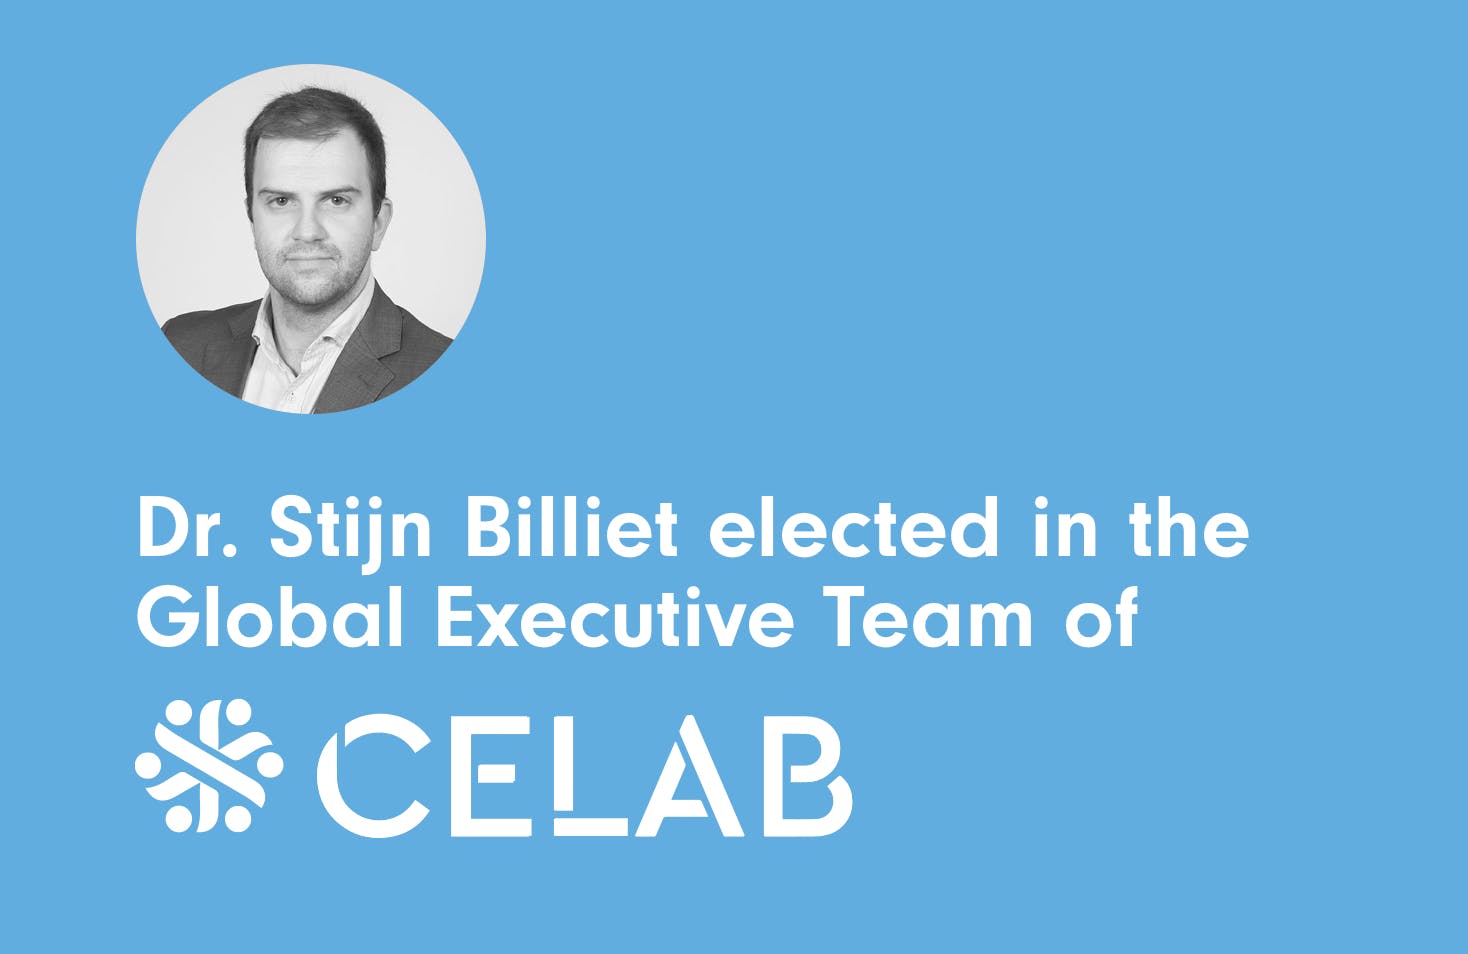 Image of Dr. Stijn Billiet elected to Global Executive Board of CELAB